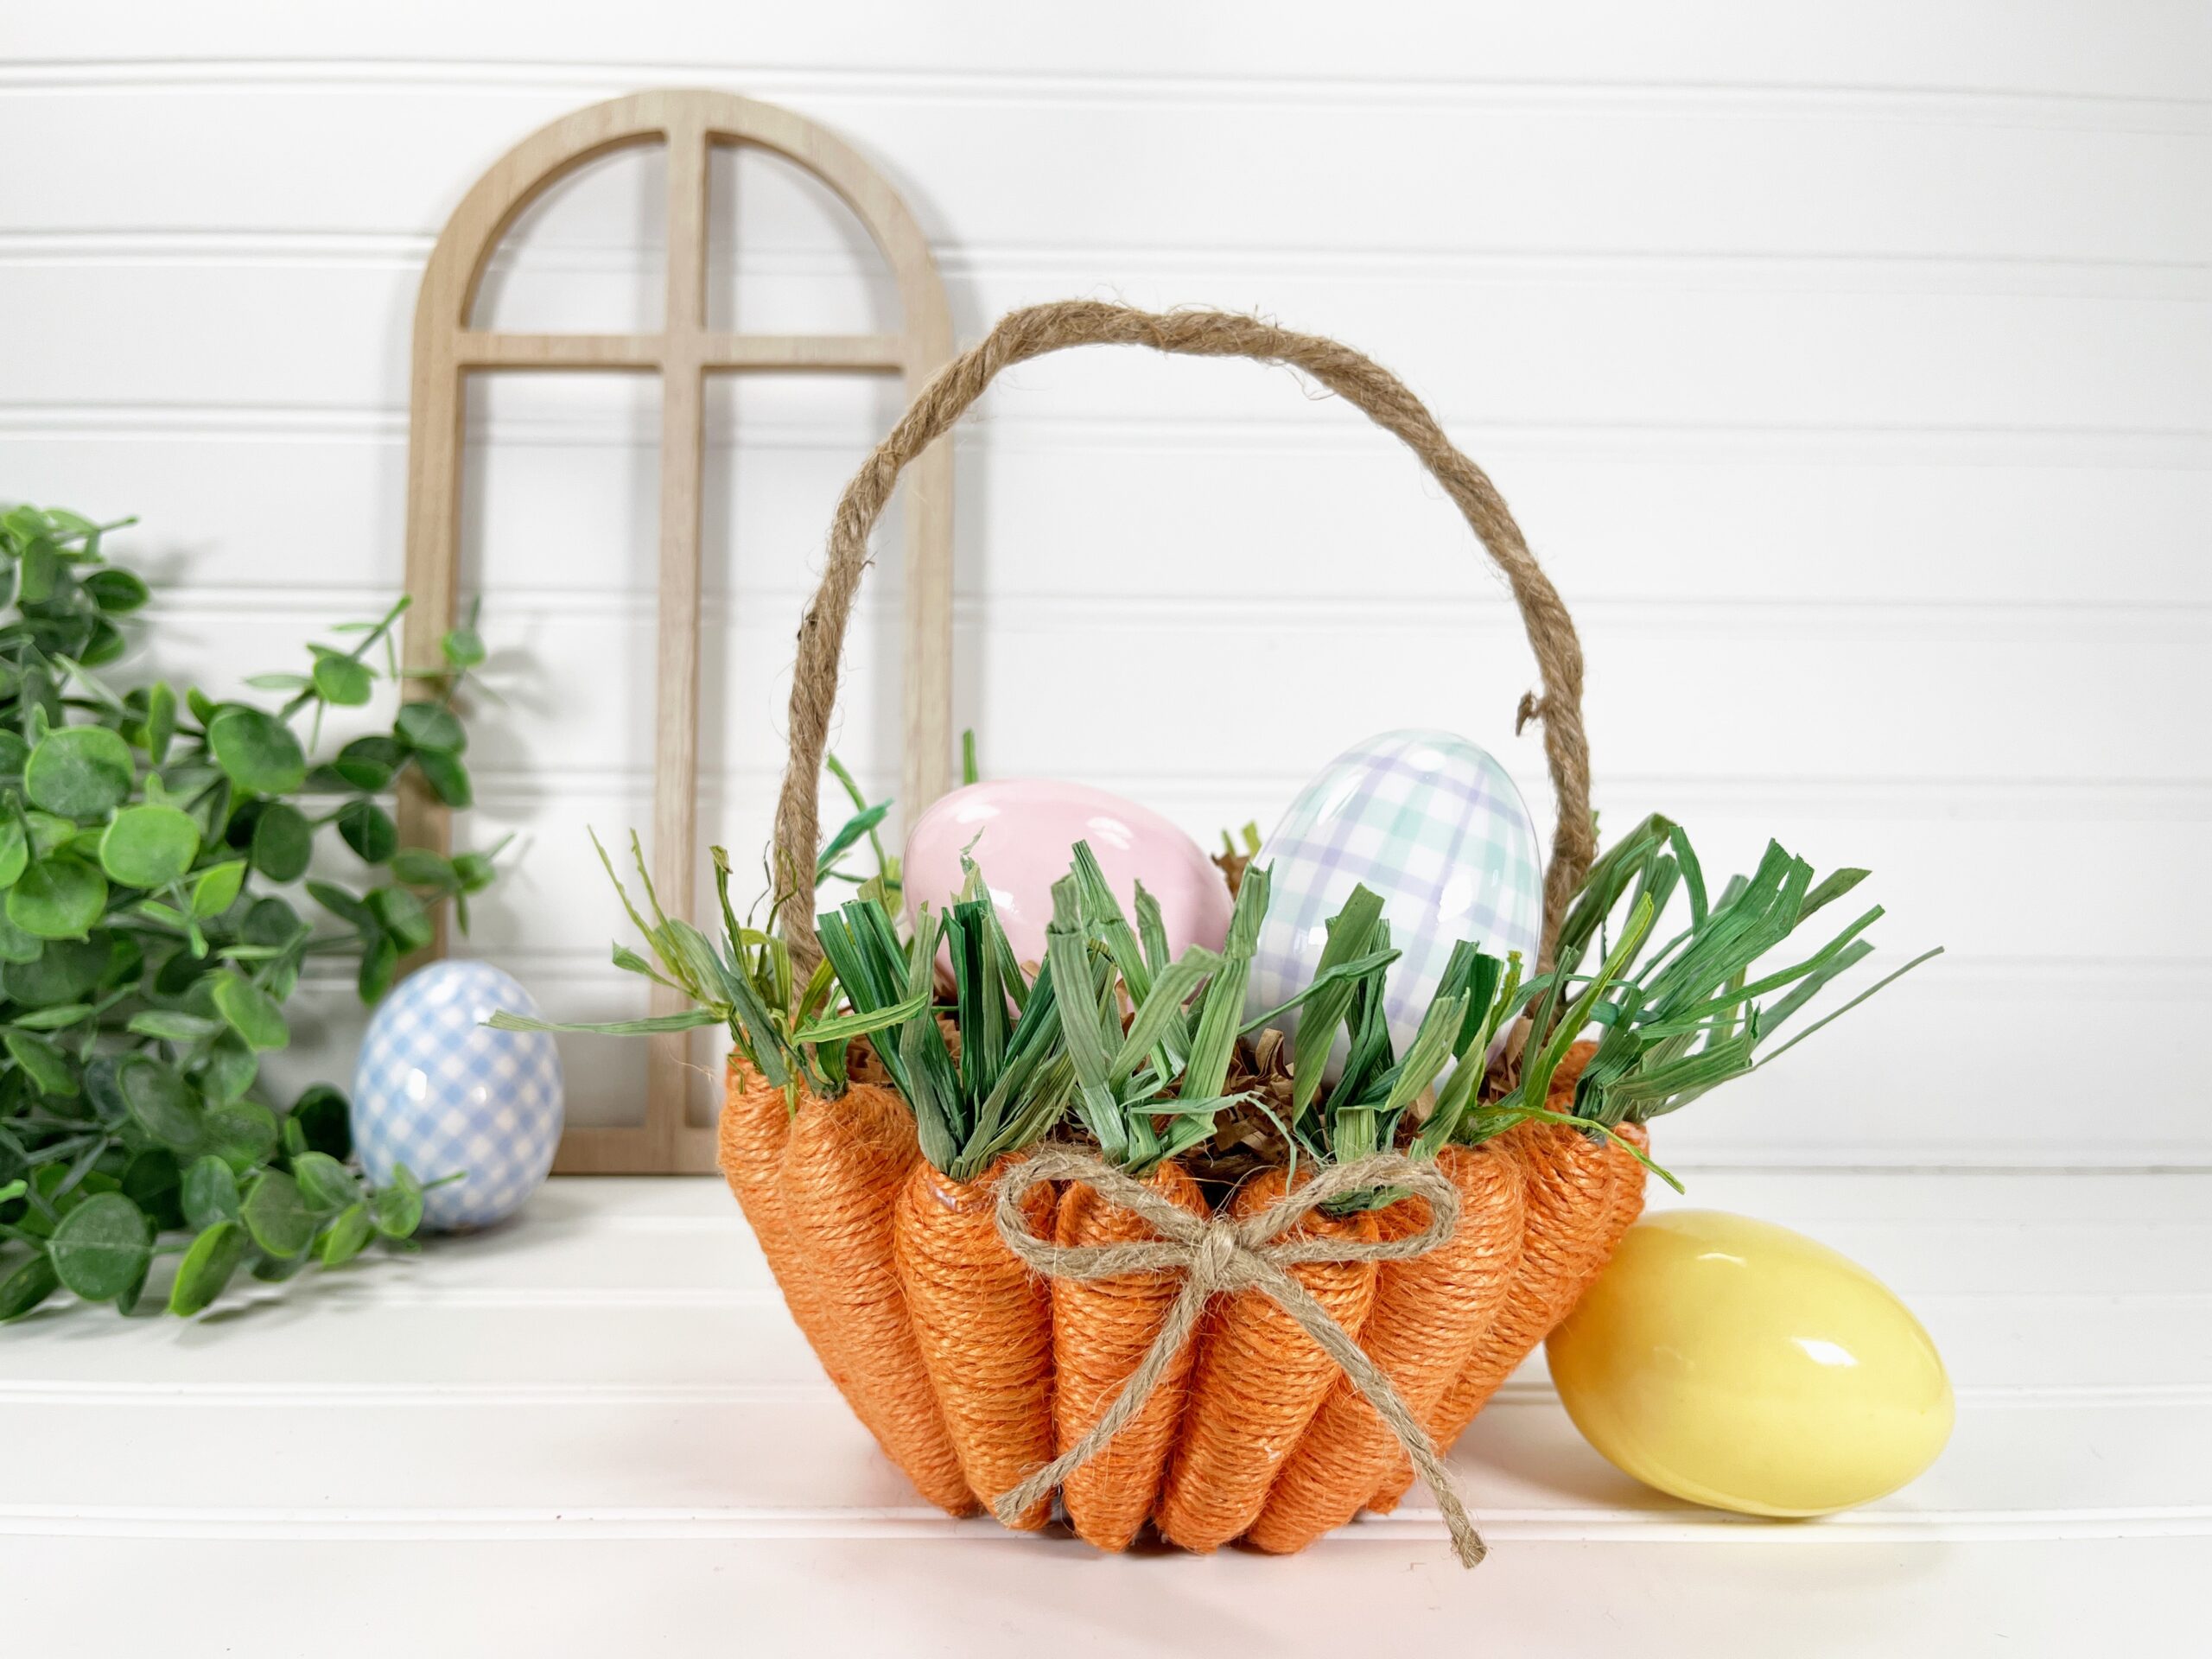 Twine wrapped carrots wrapped around a cup with a jute handle - a DIY Easter basket. It sits on a white table with colorful and plaid plastic Easter eggs inside and next to it.